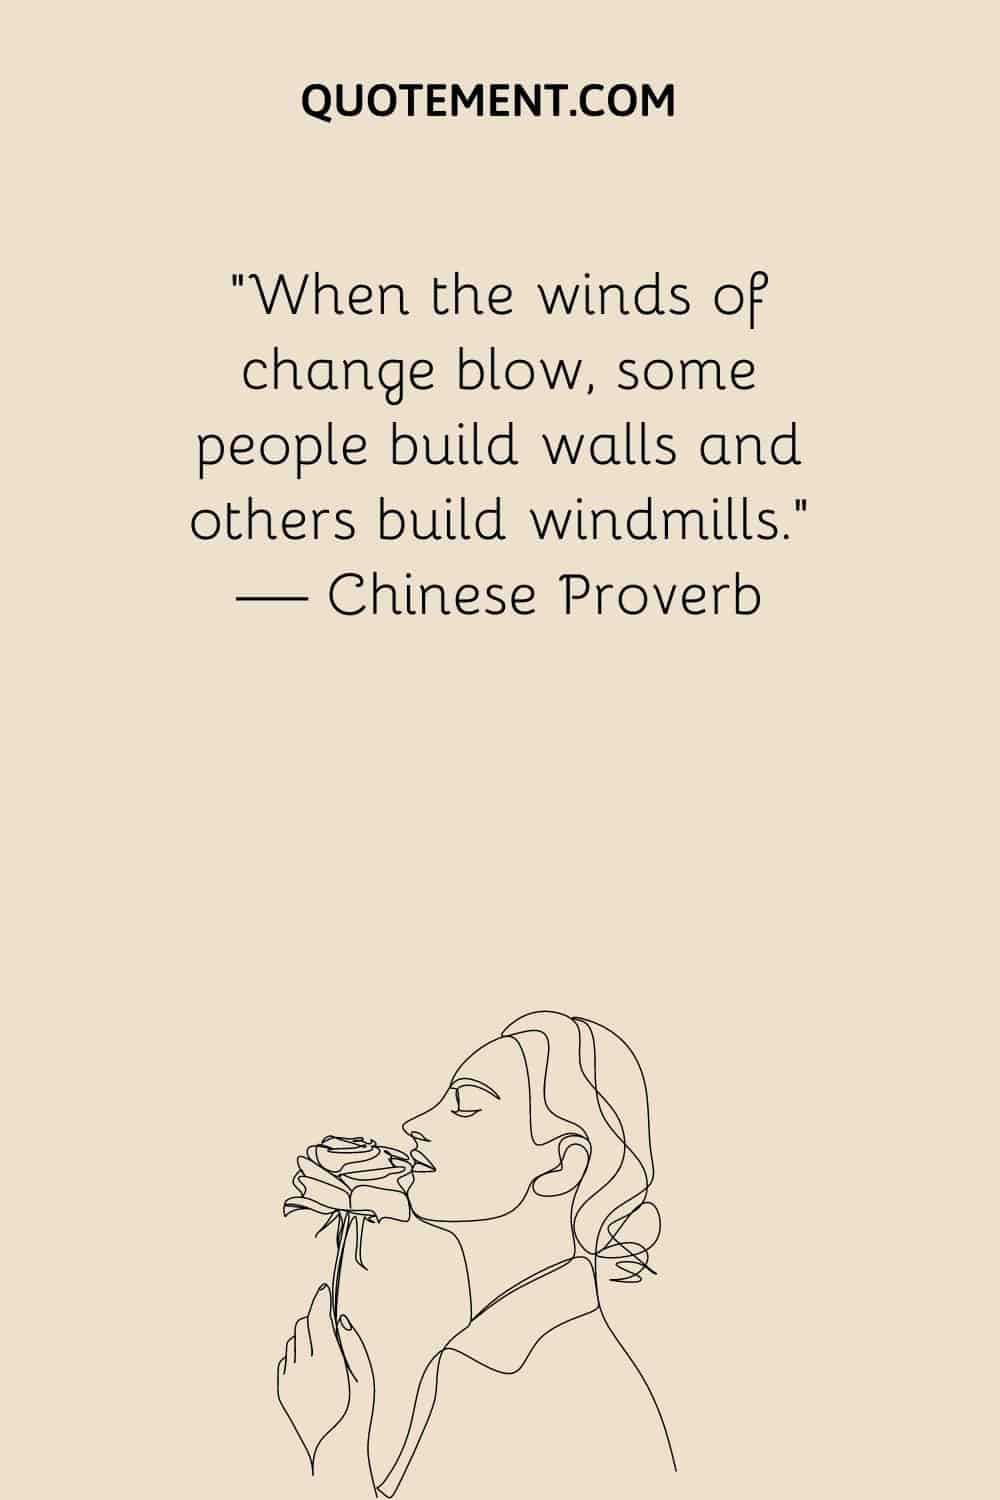 When the winds of change blow, some people build walls and others build windmills